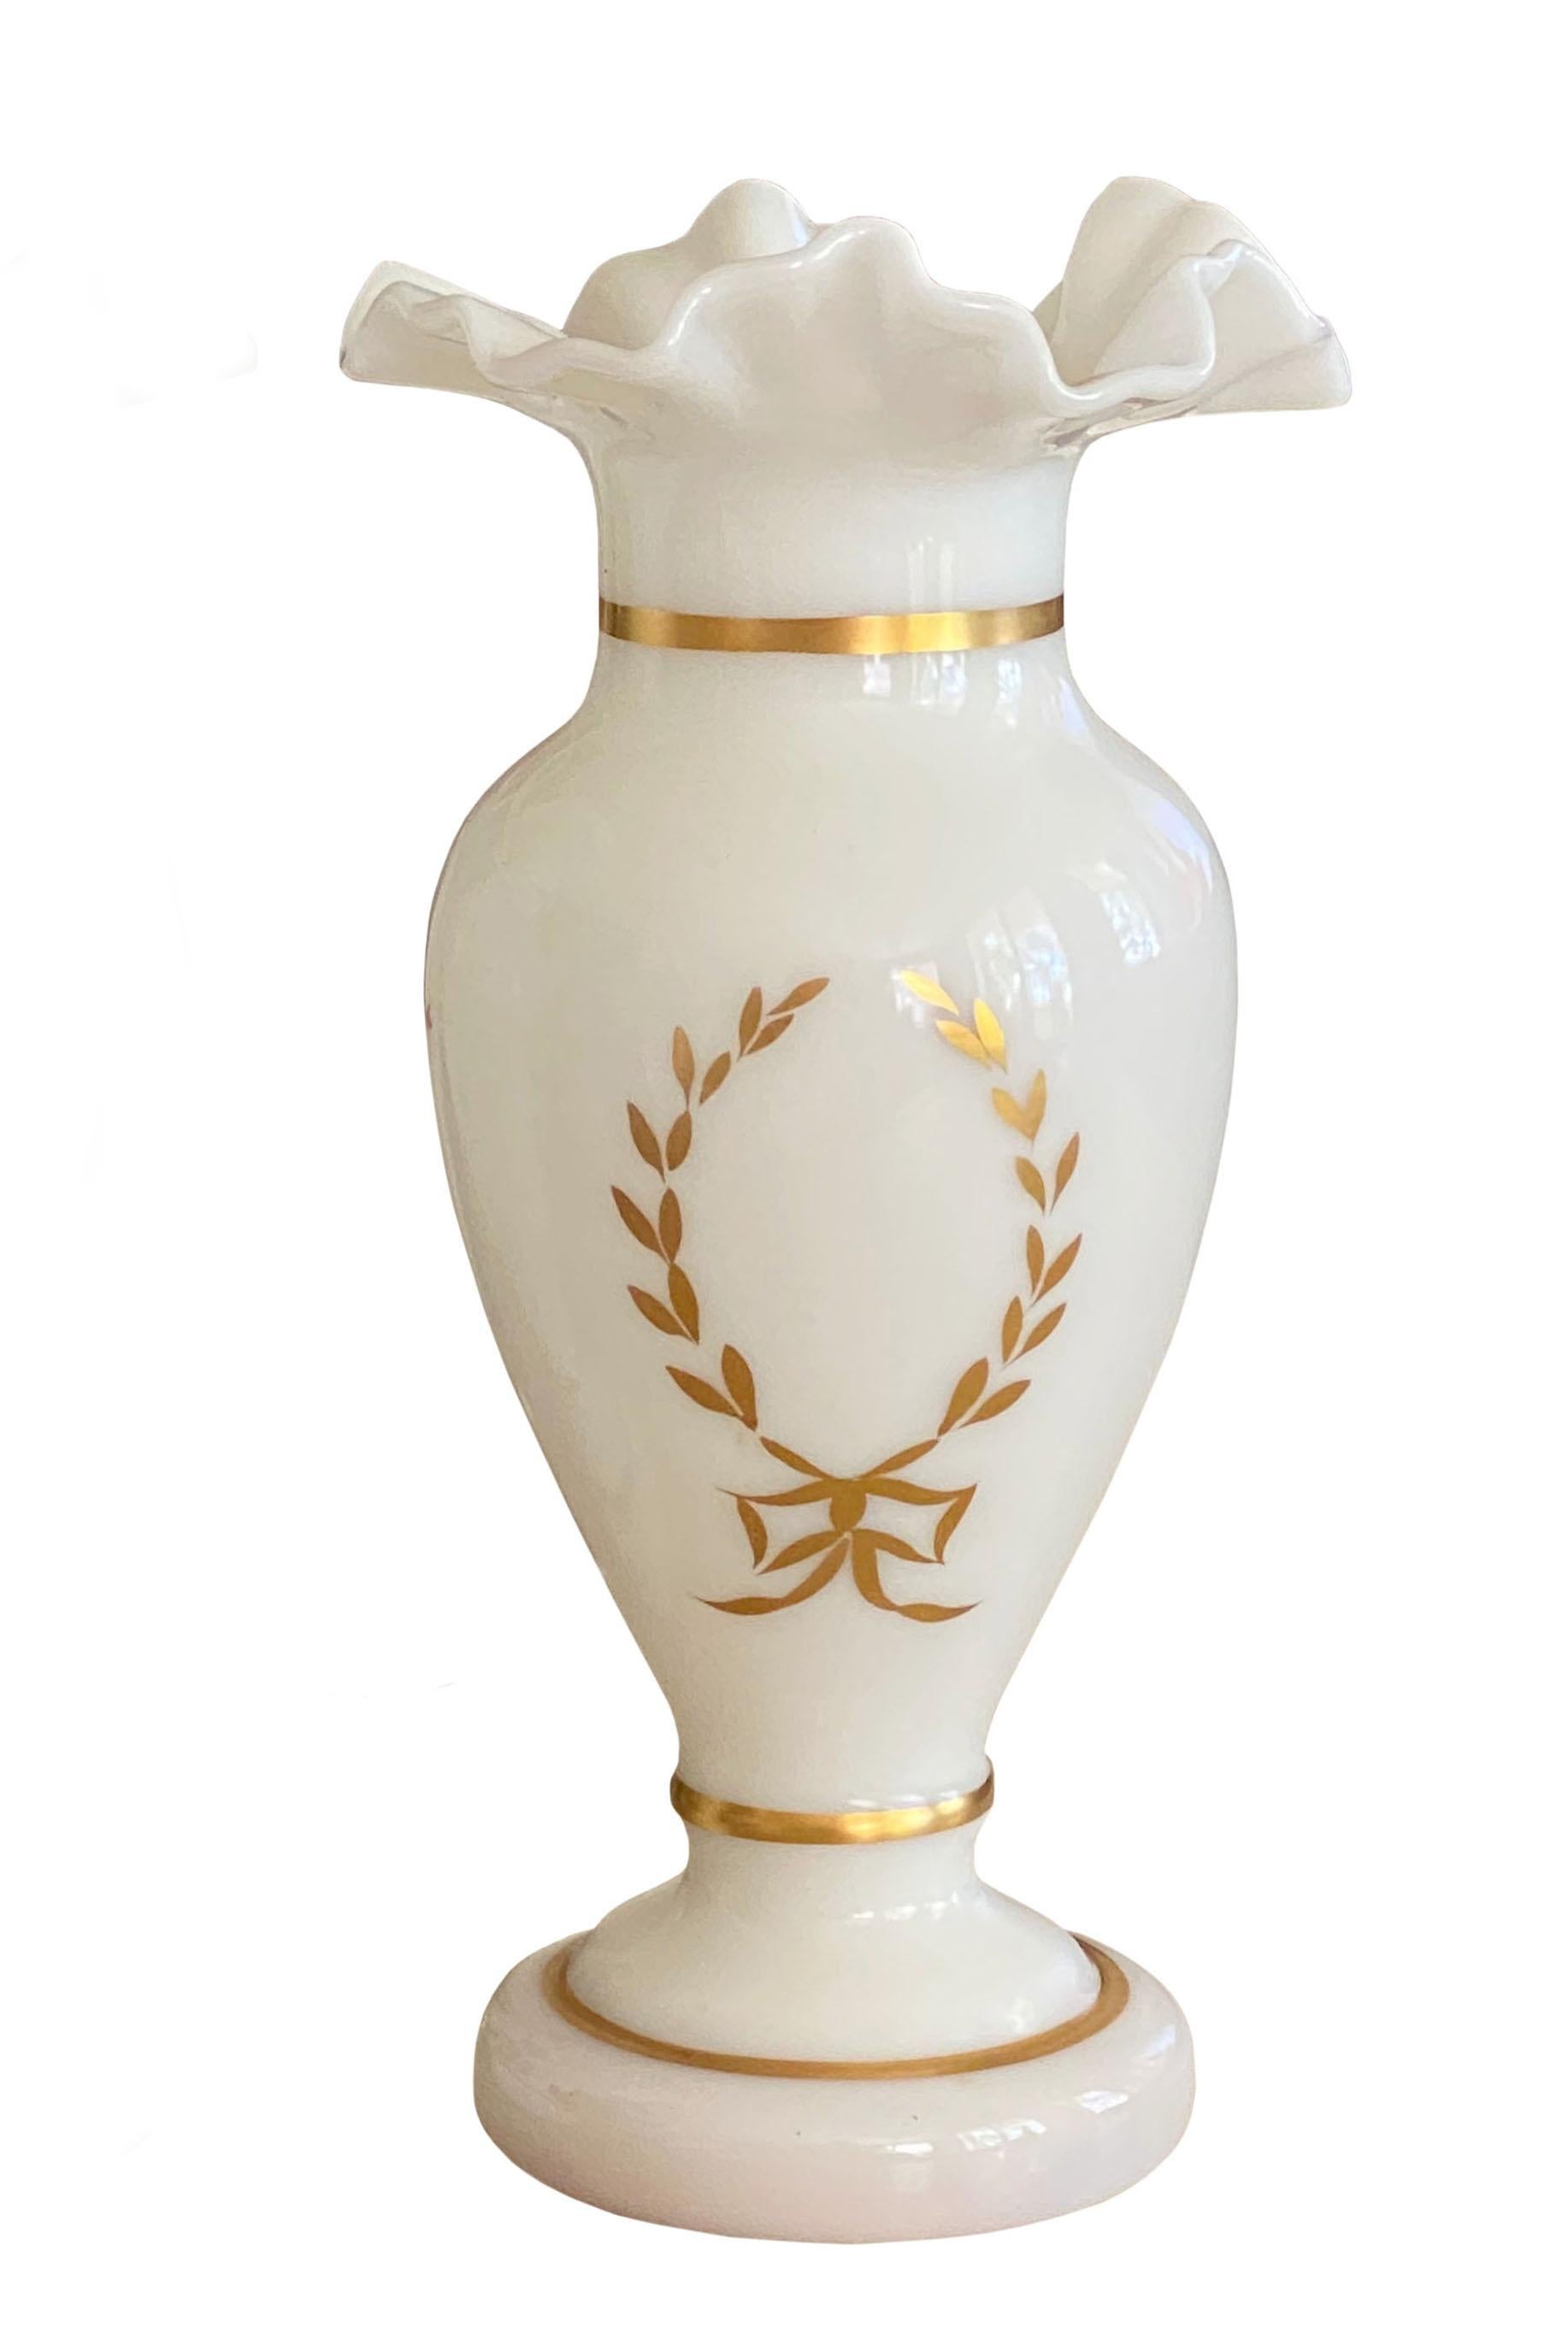 19th Century Antique White and Gilt Opaline Vases, a Pair For Sale